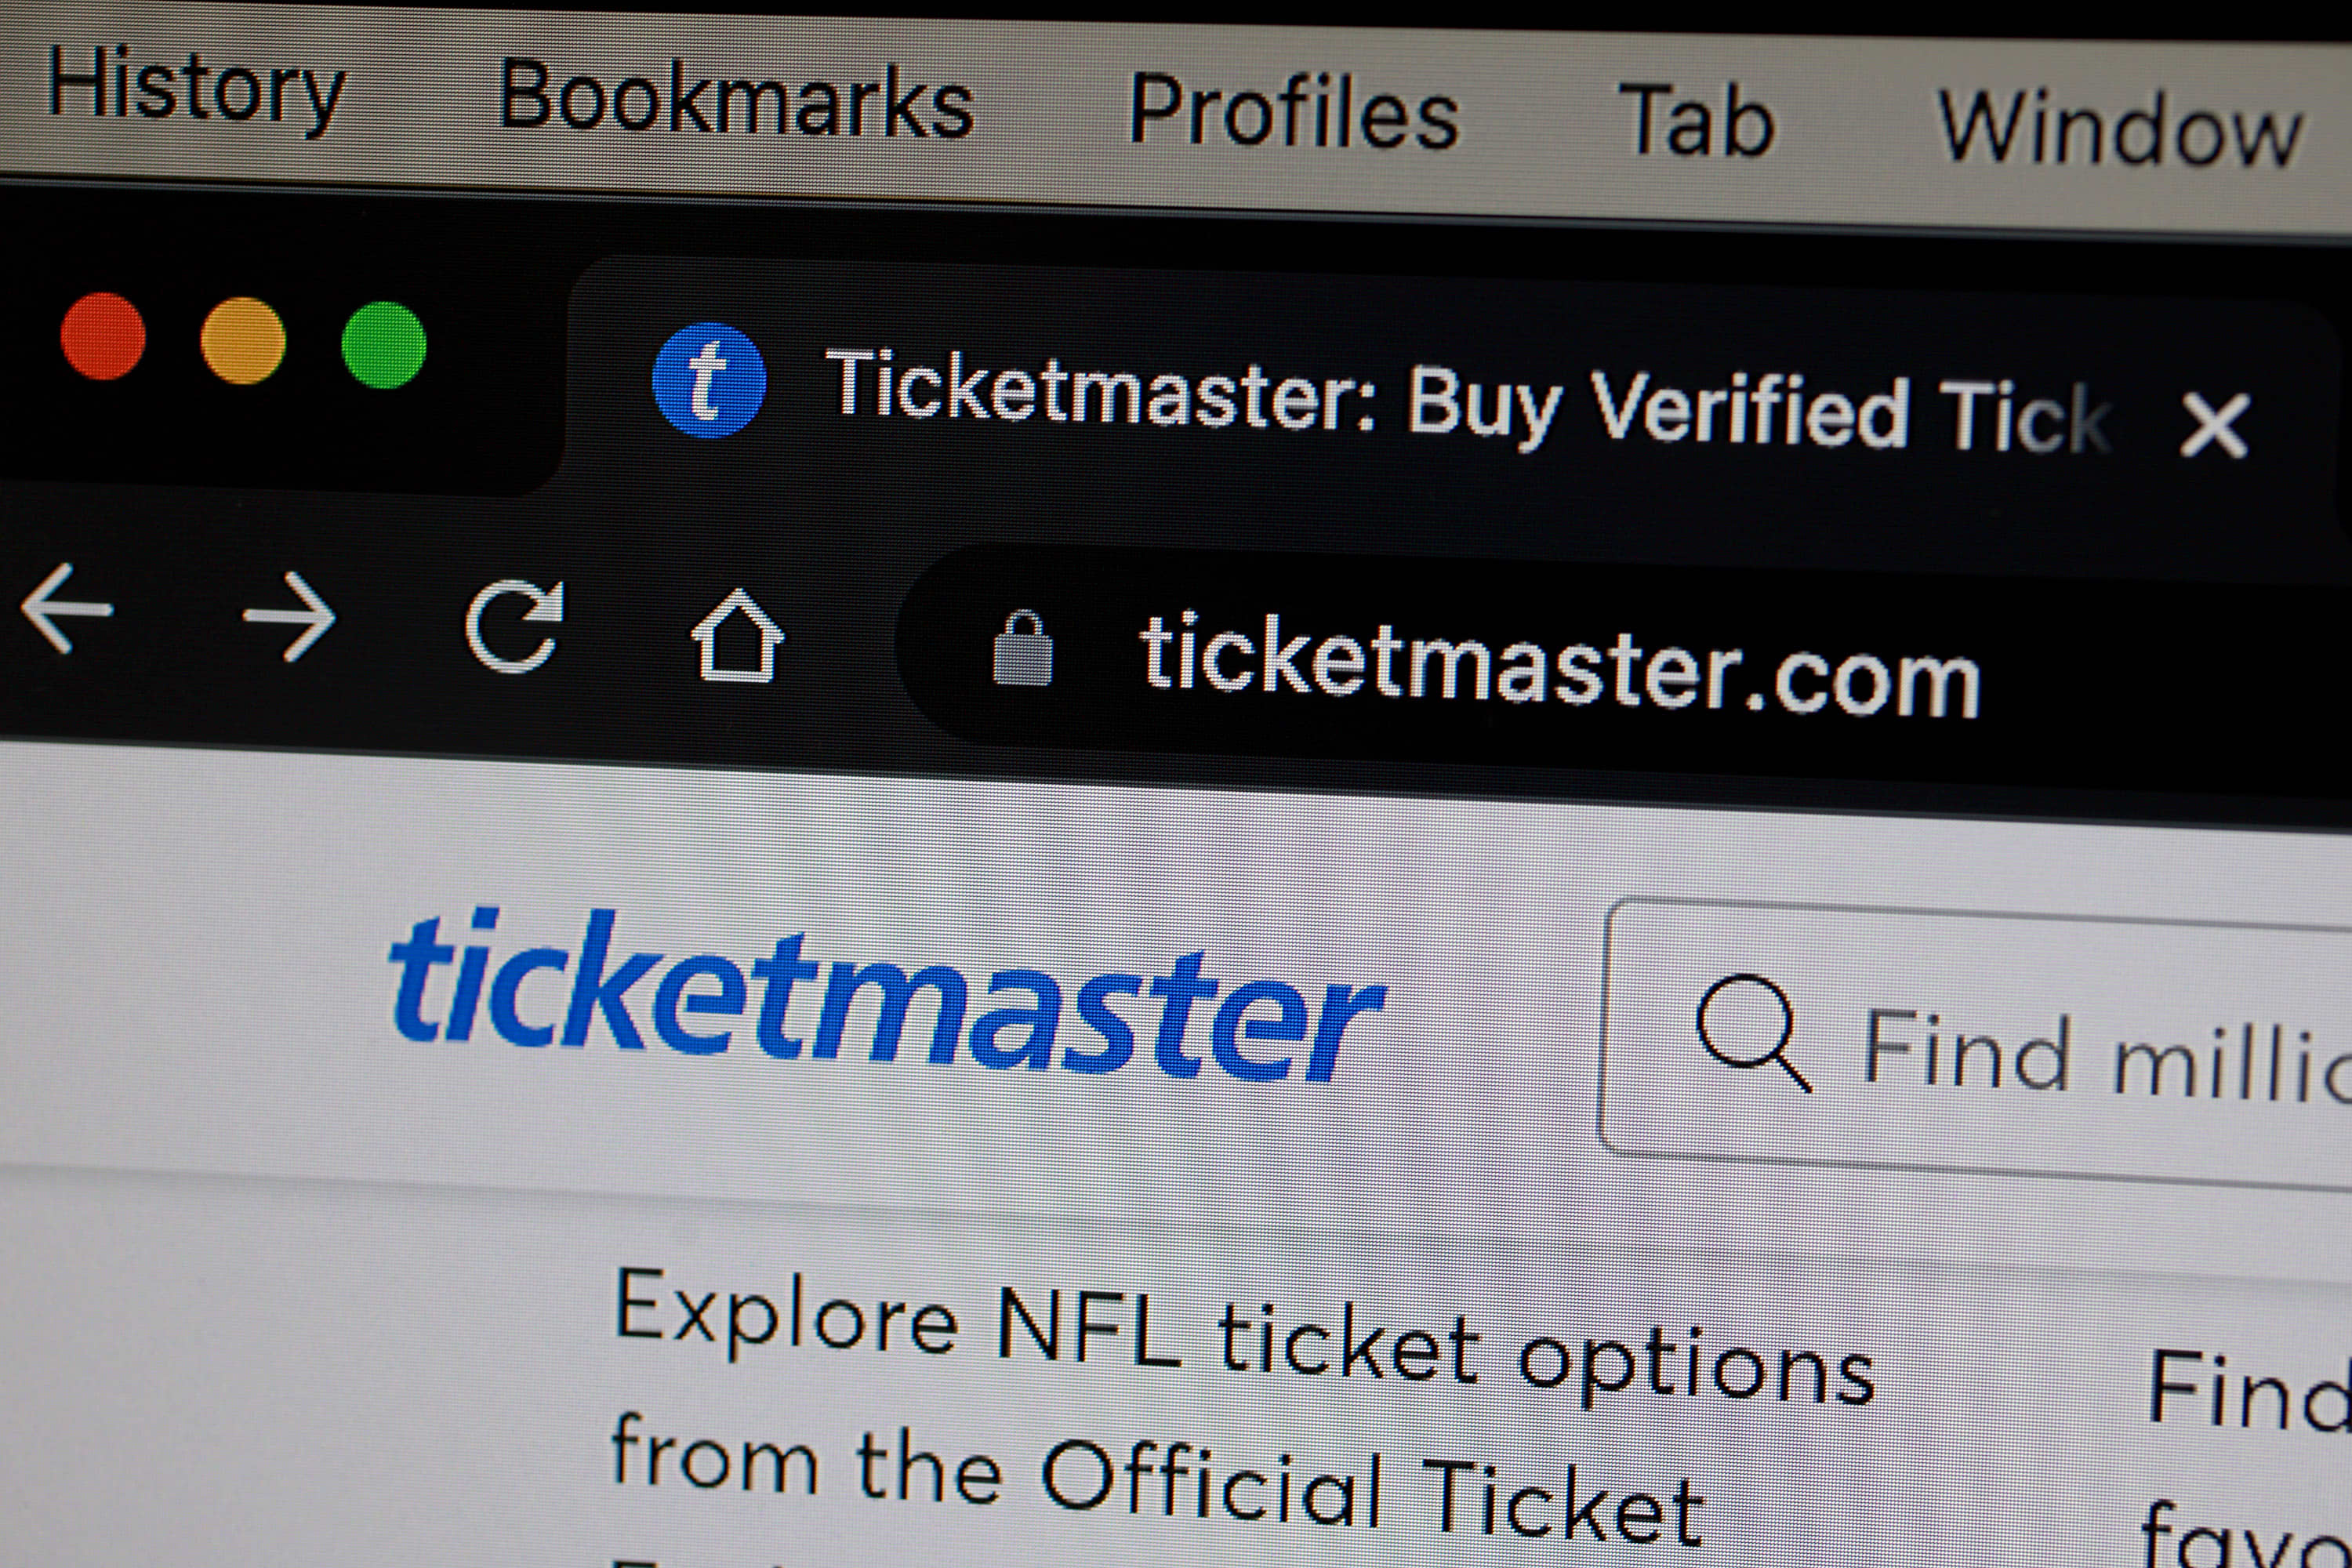 The Live Nation and Ticketmaster monopoly of live entertainment